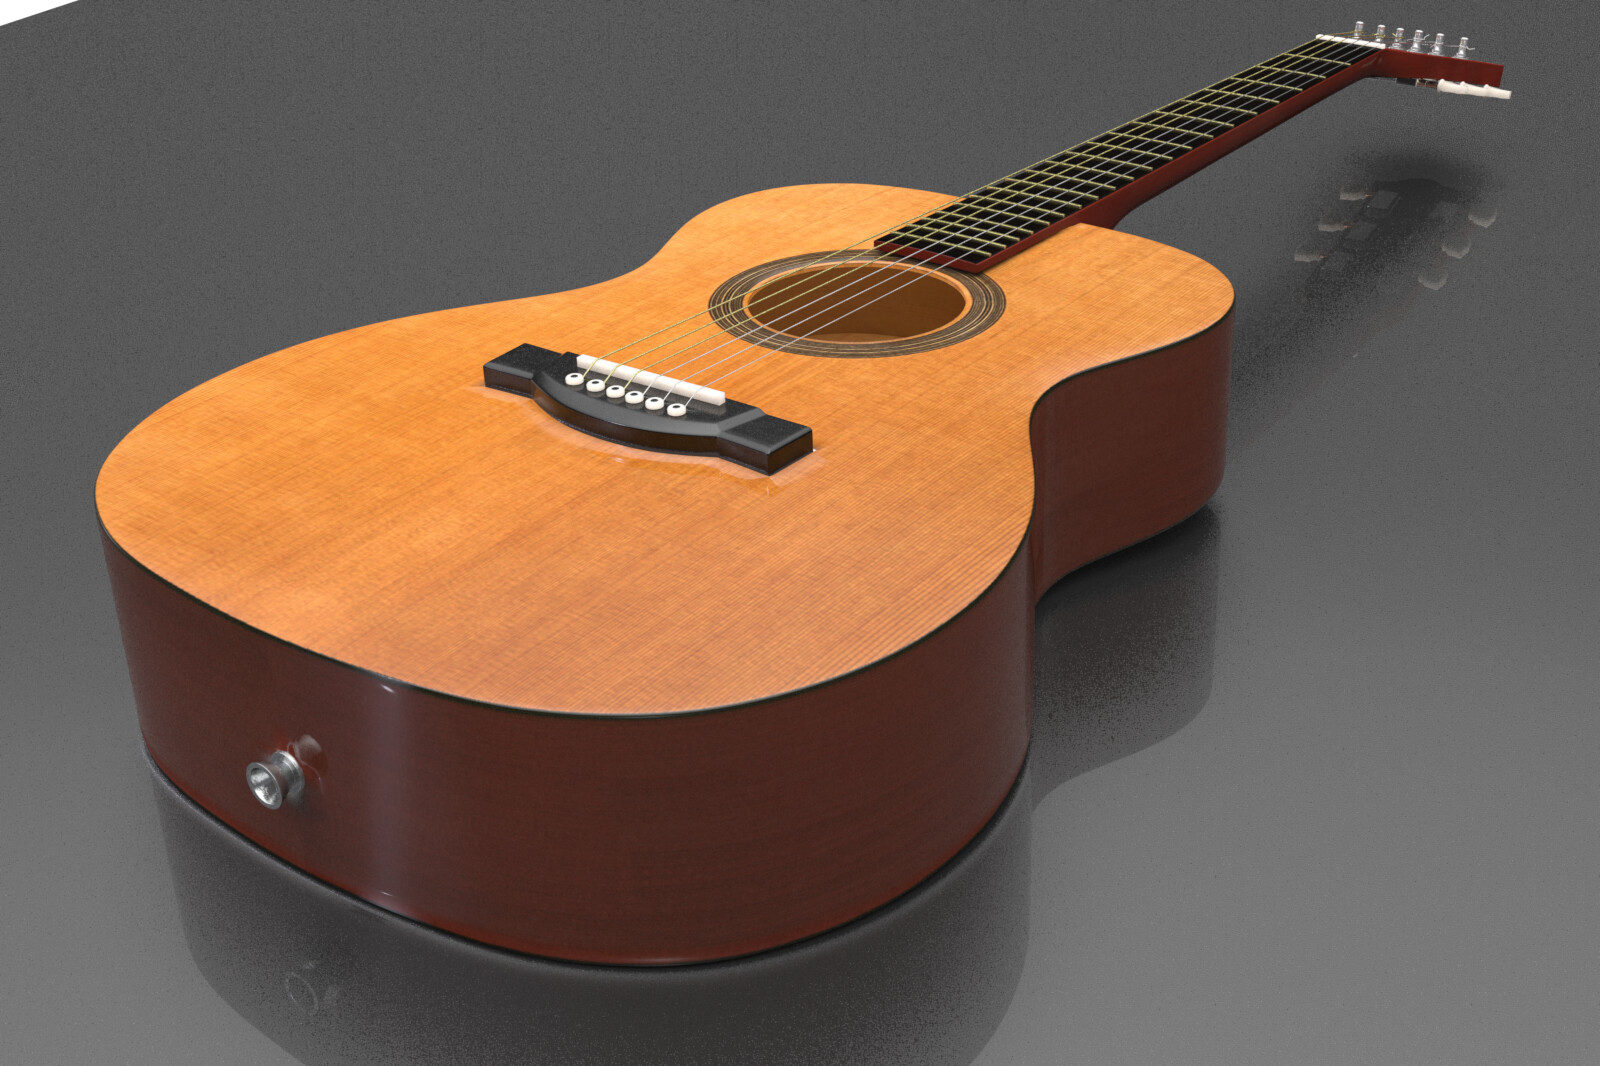 Acoustic Dreadnought modeled in Modo - this is an in-modo render. I converted this model to a native ArchiCAD object, with appropriate vectorial cleanups and the ability for the materials to be easily tweaked in use.